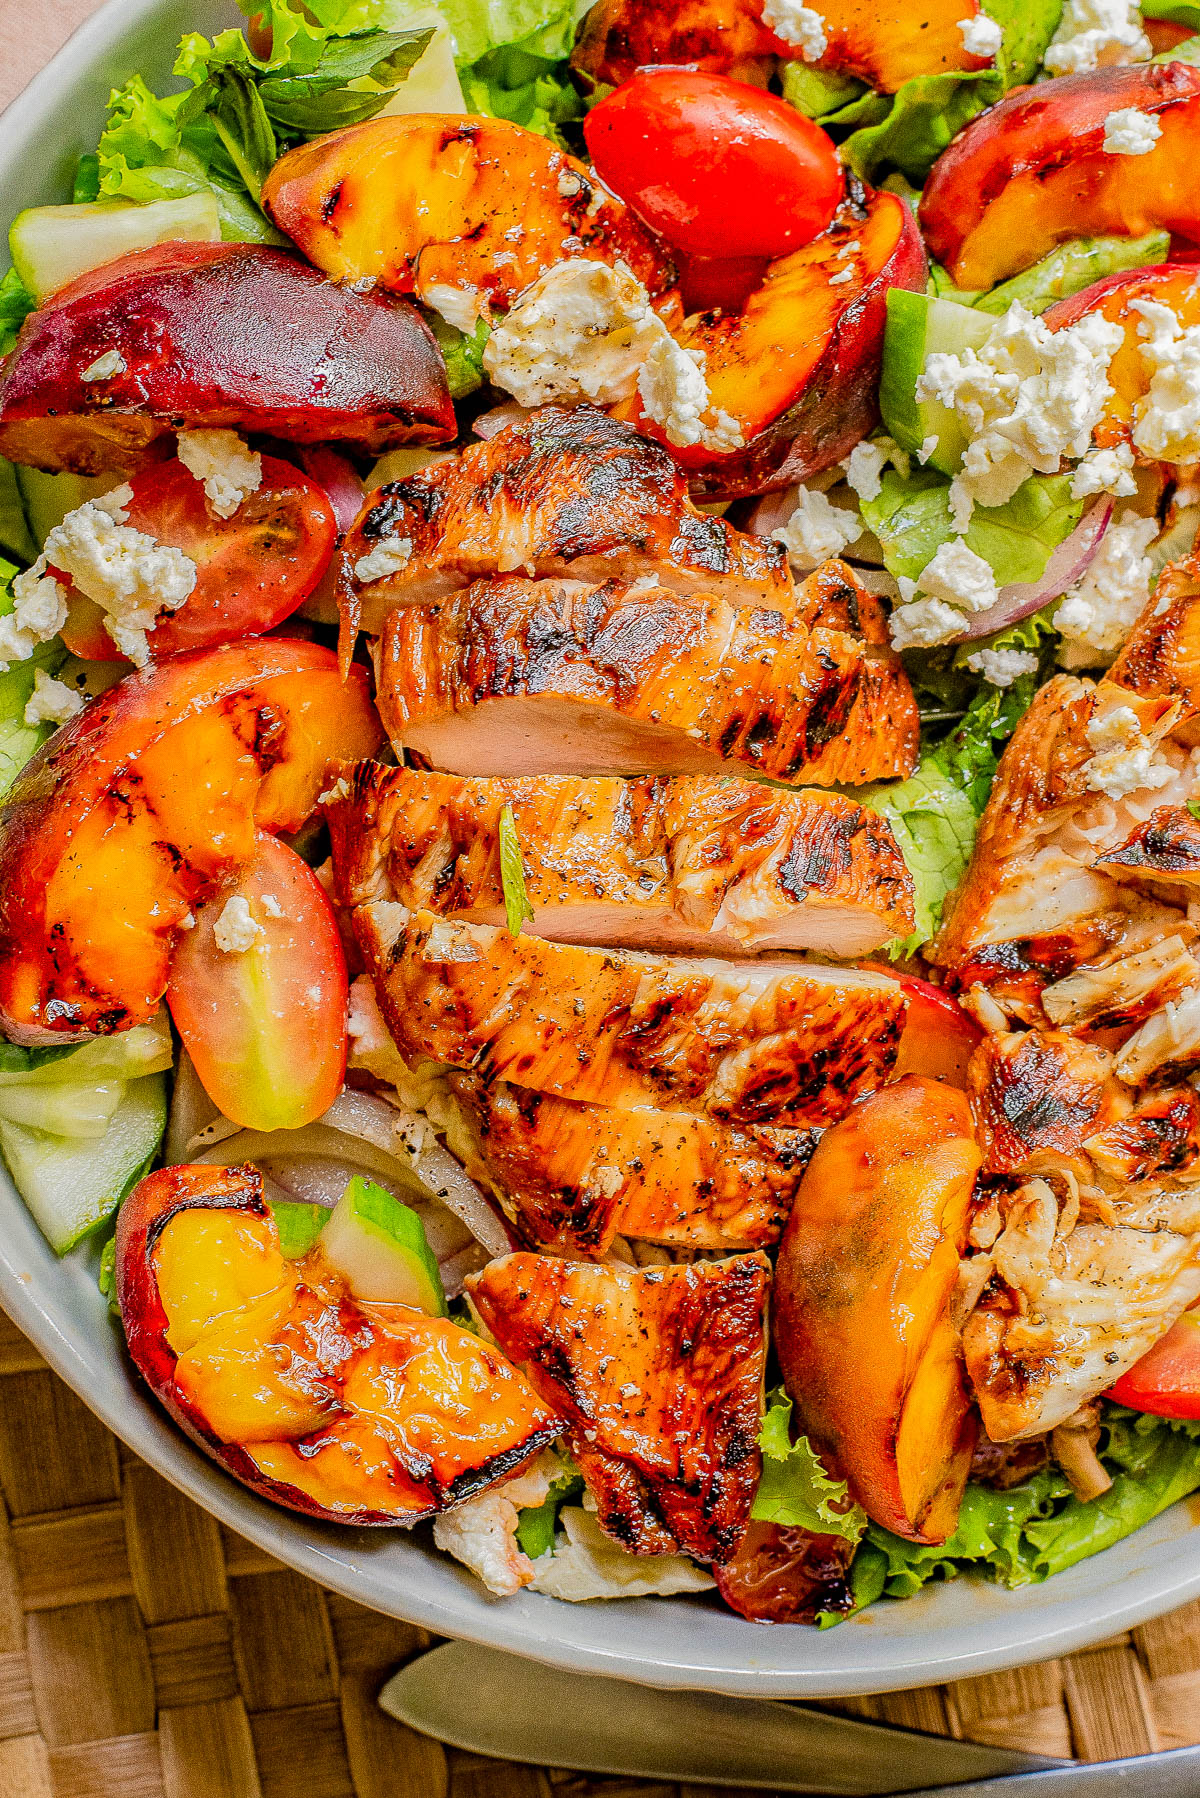 A healthy salad featuring grilled chicken, assorted greens, tomatoes, peaches, and crumbled cheese, served in a bowl on a woven mat.